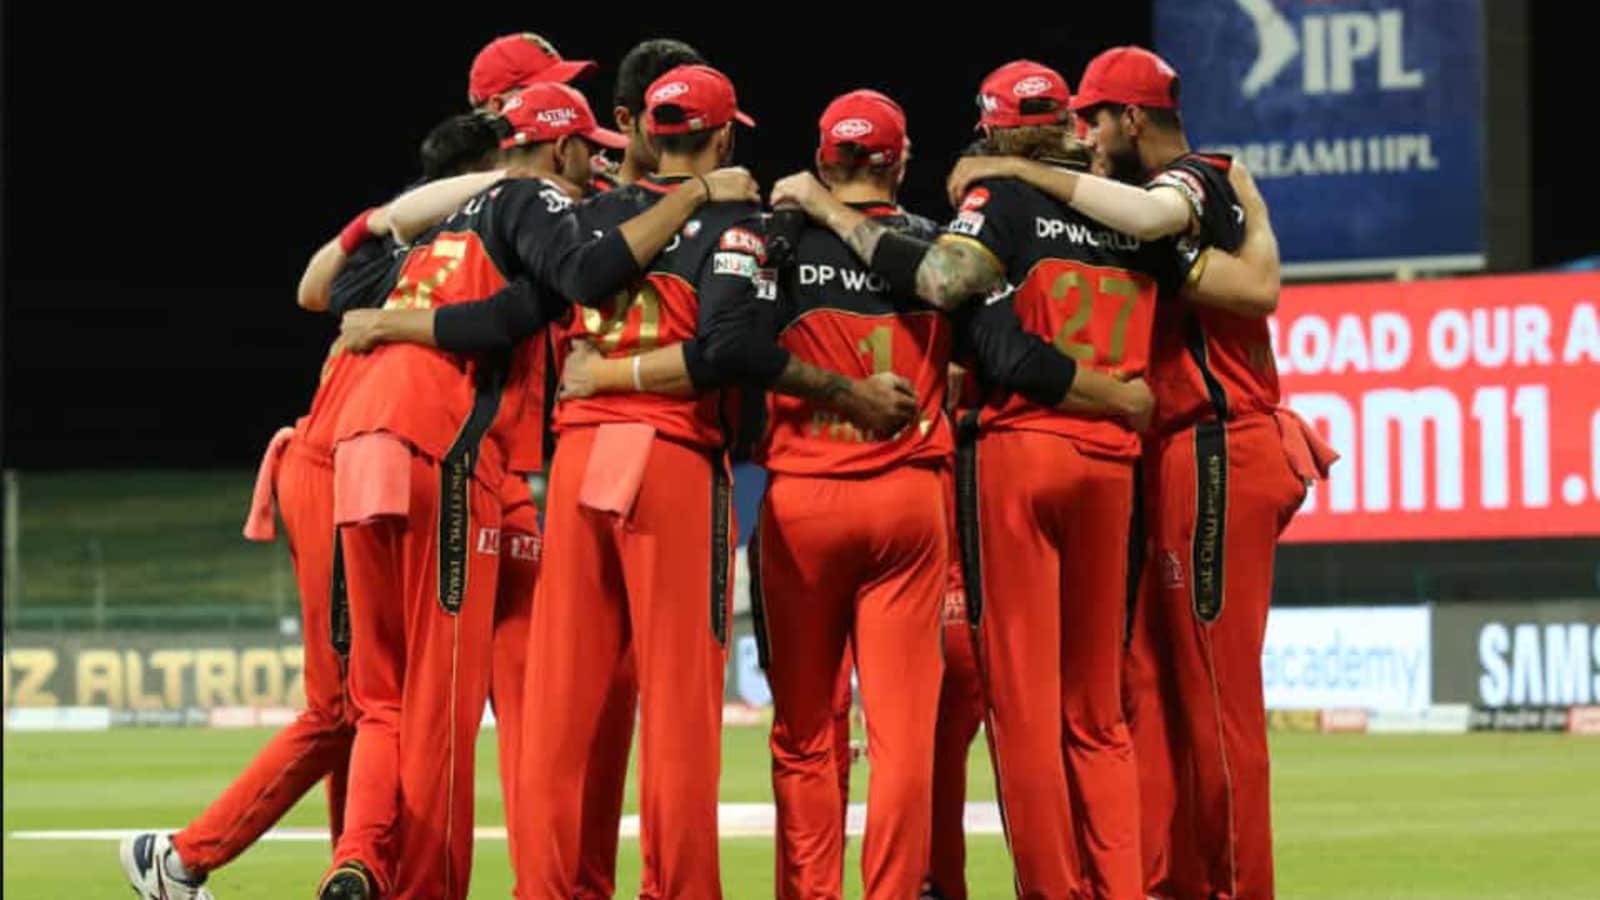 IPL RCB Predicted XI Vs MI: New Opening Pair, A Revamped Middle Order Ready To Challenge Defending Champions